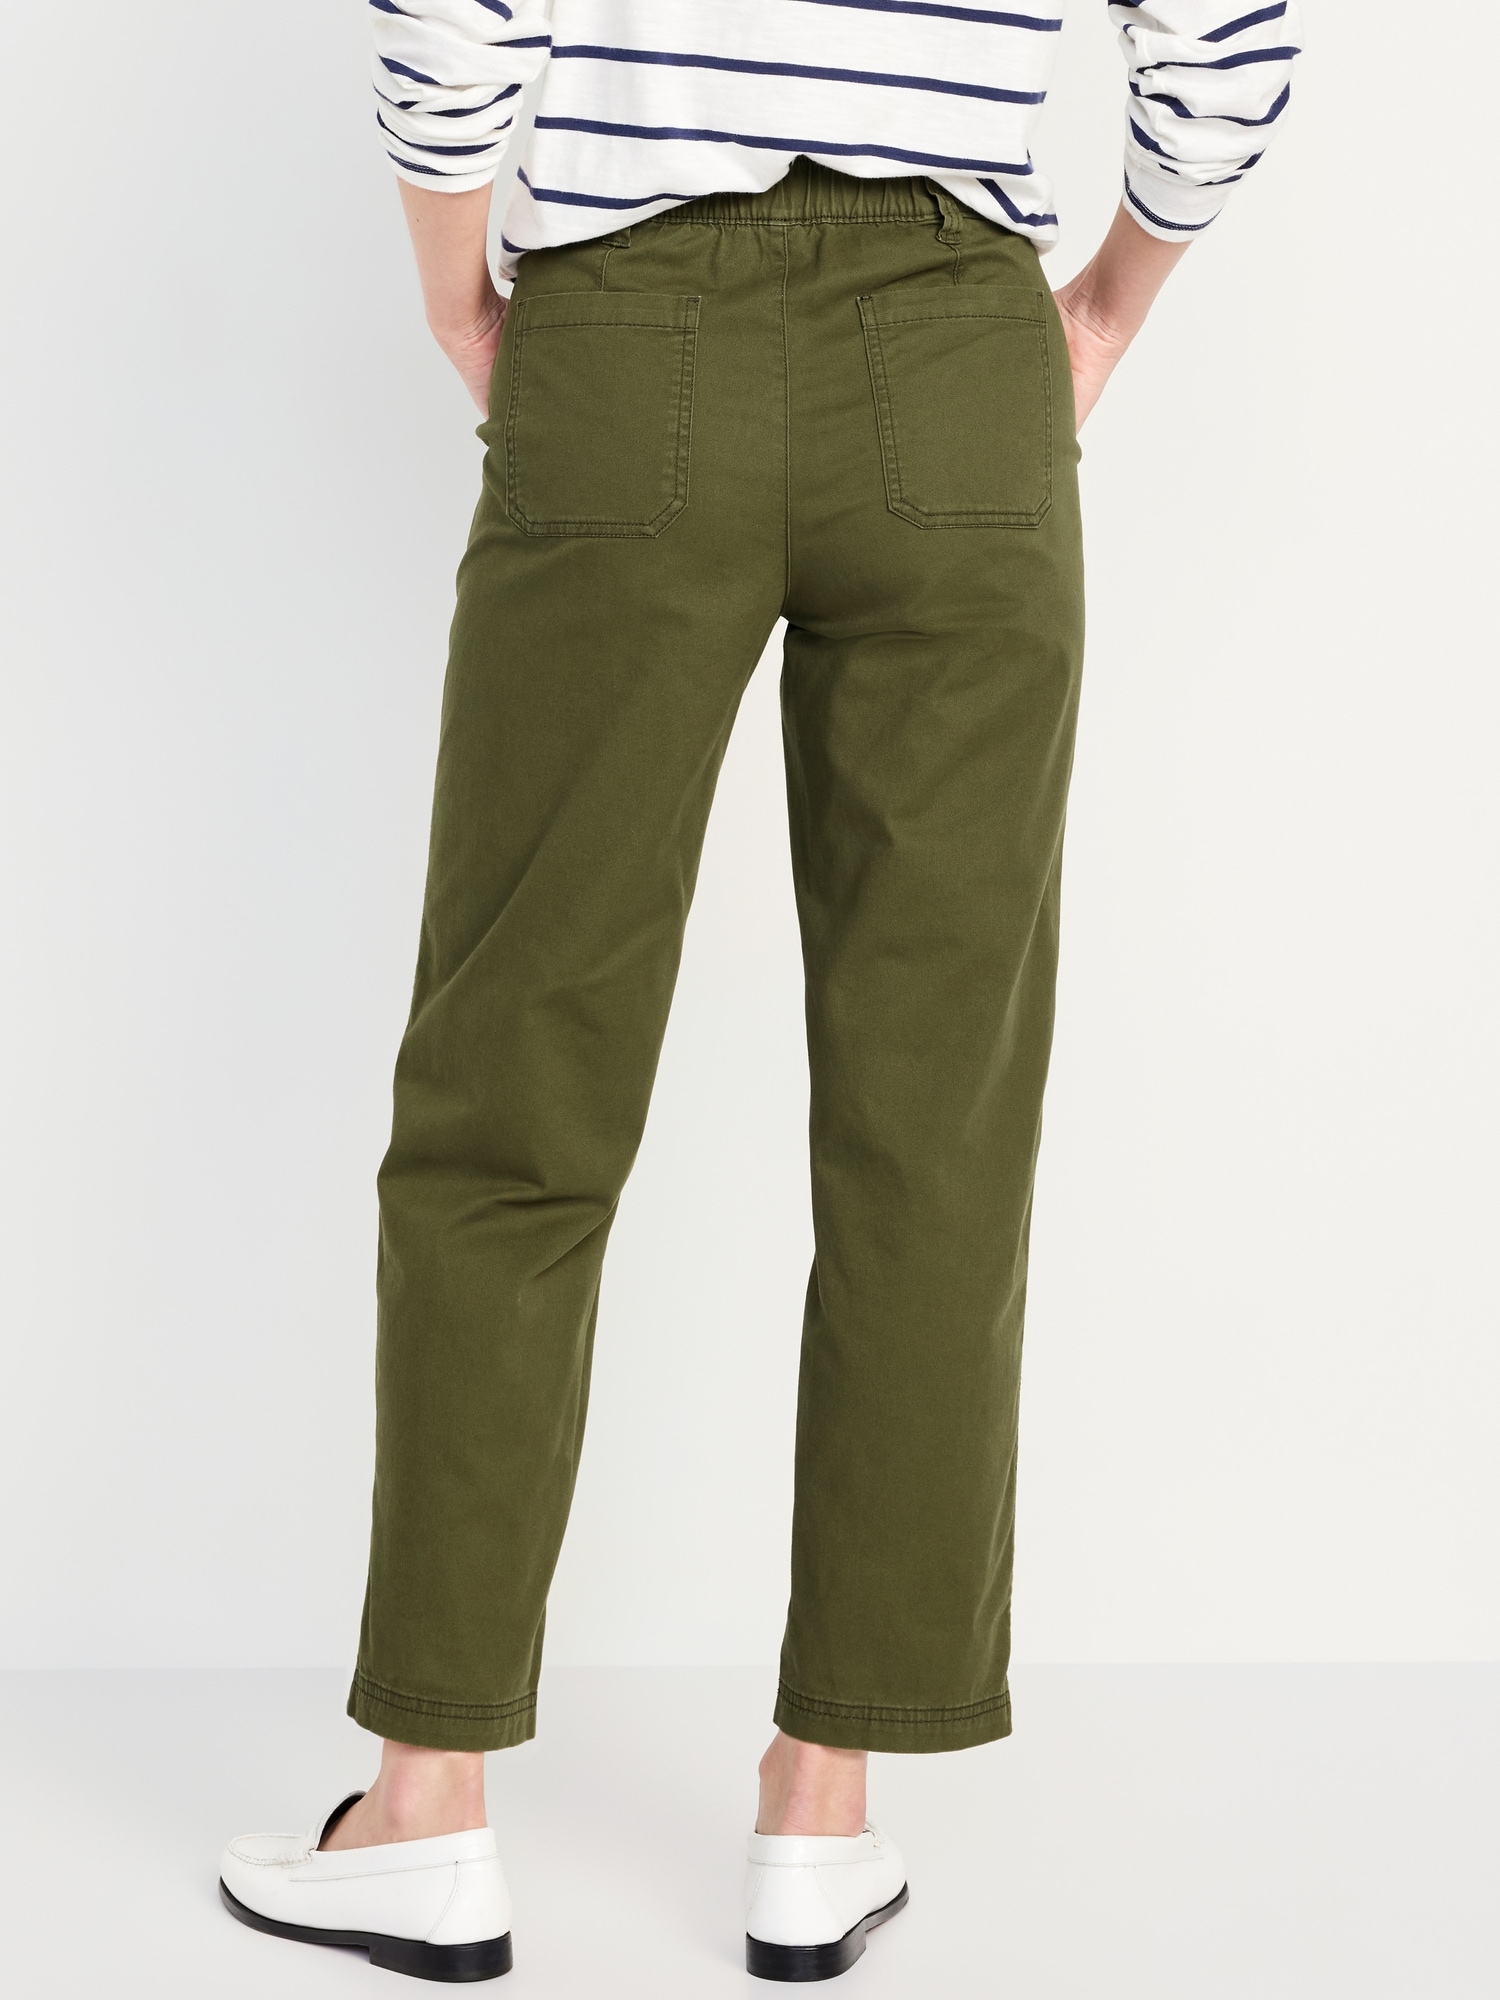 Old Navy High-Waisted OGC Chino Pants for Women Alpine Tundra